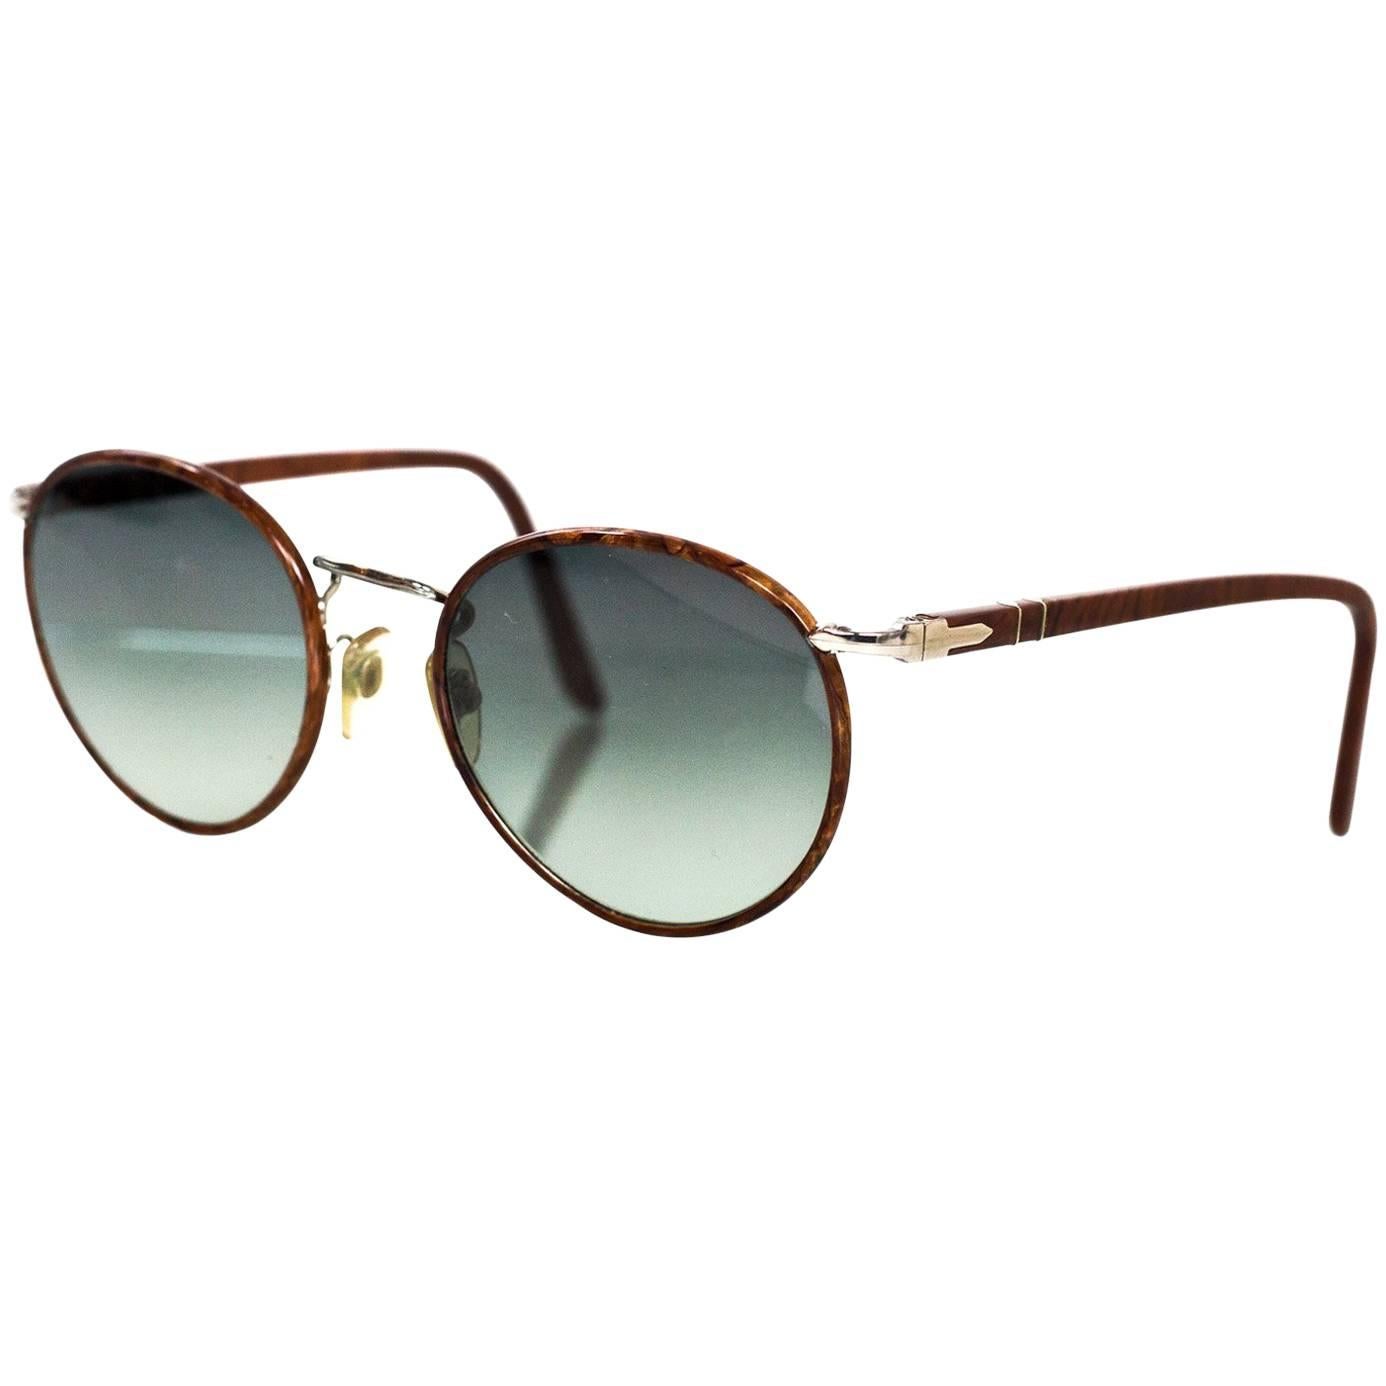 Persol Round Frame Tortoise Sunglasses with Case